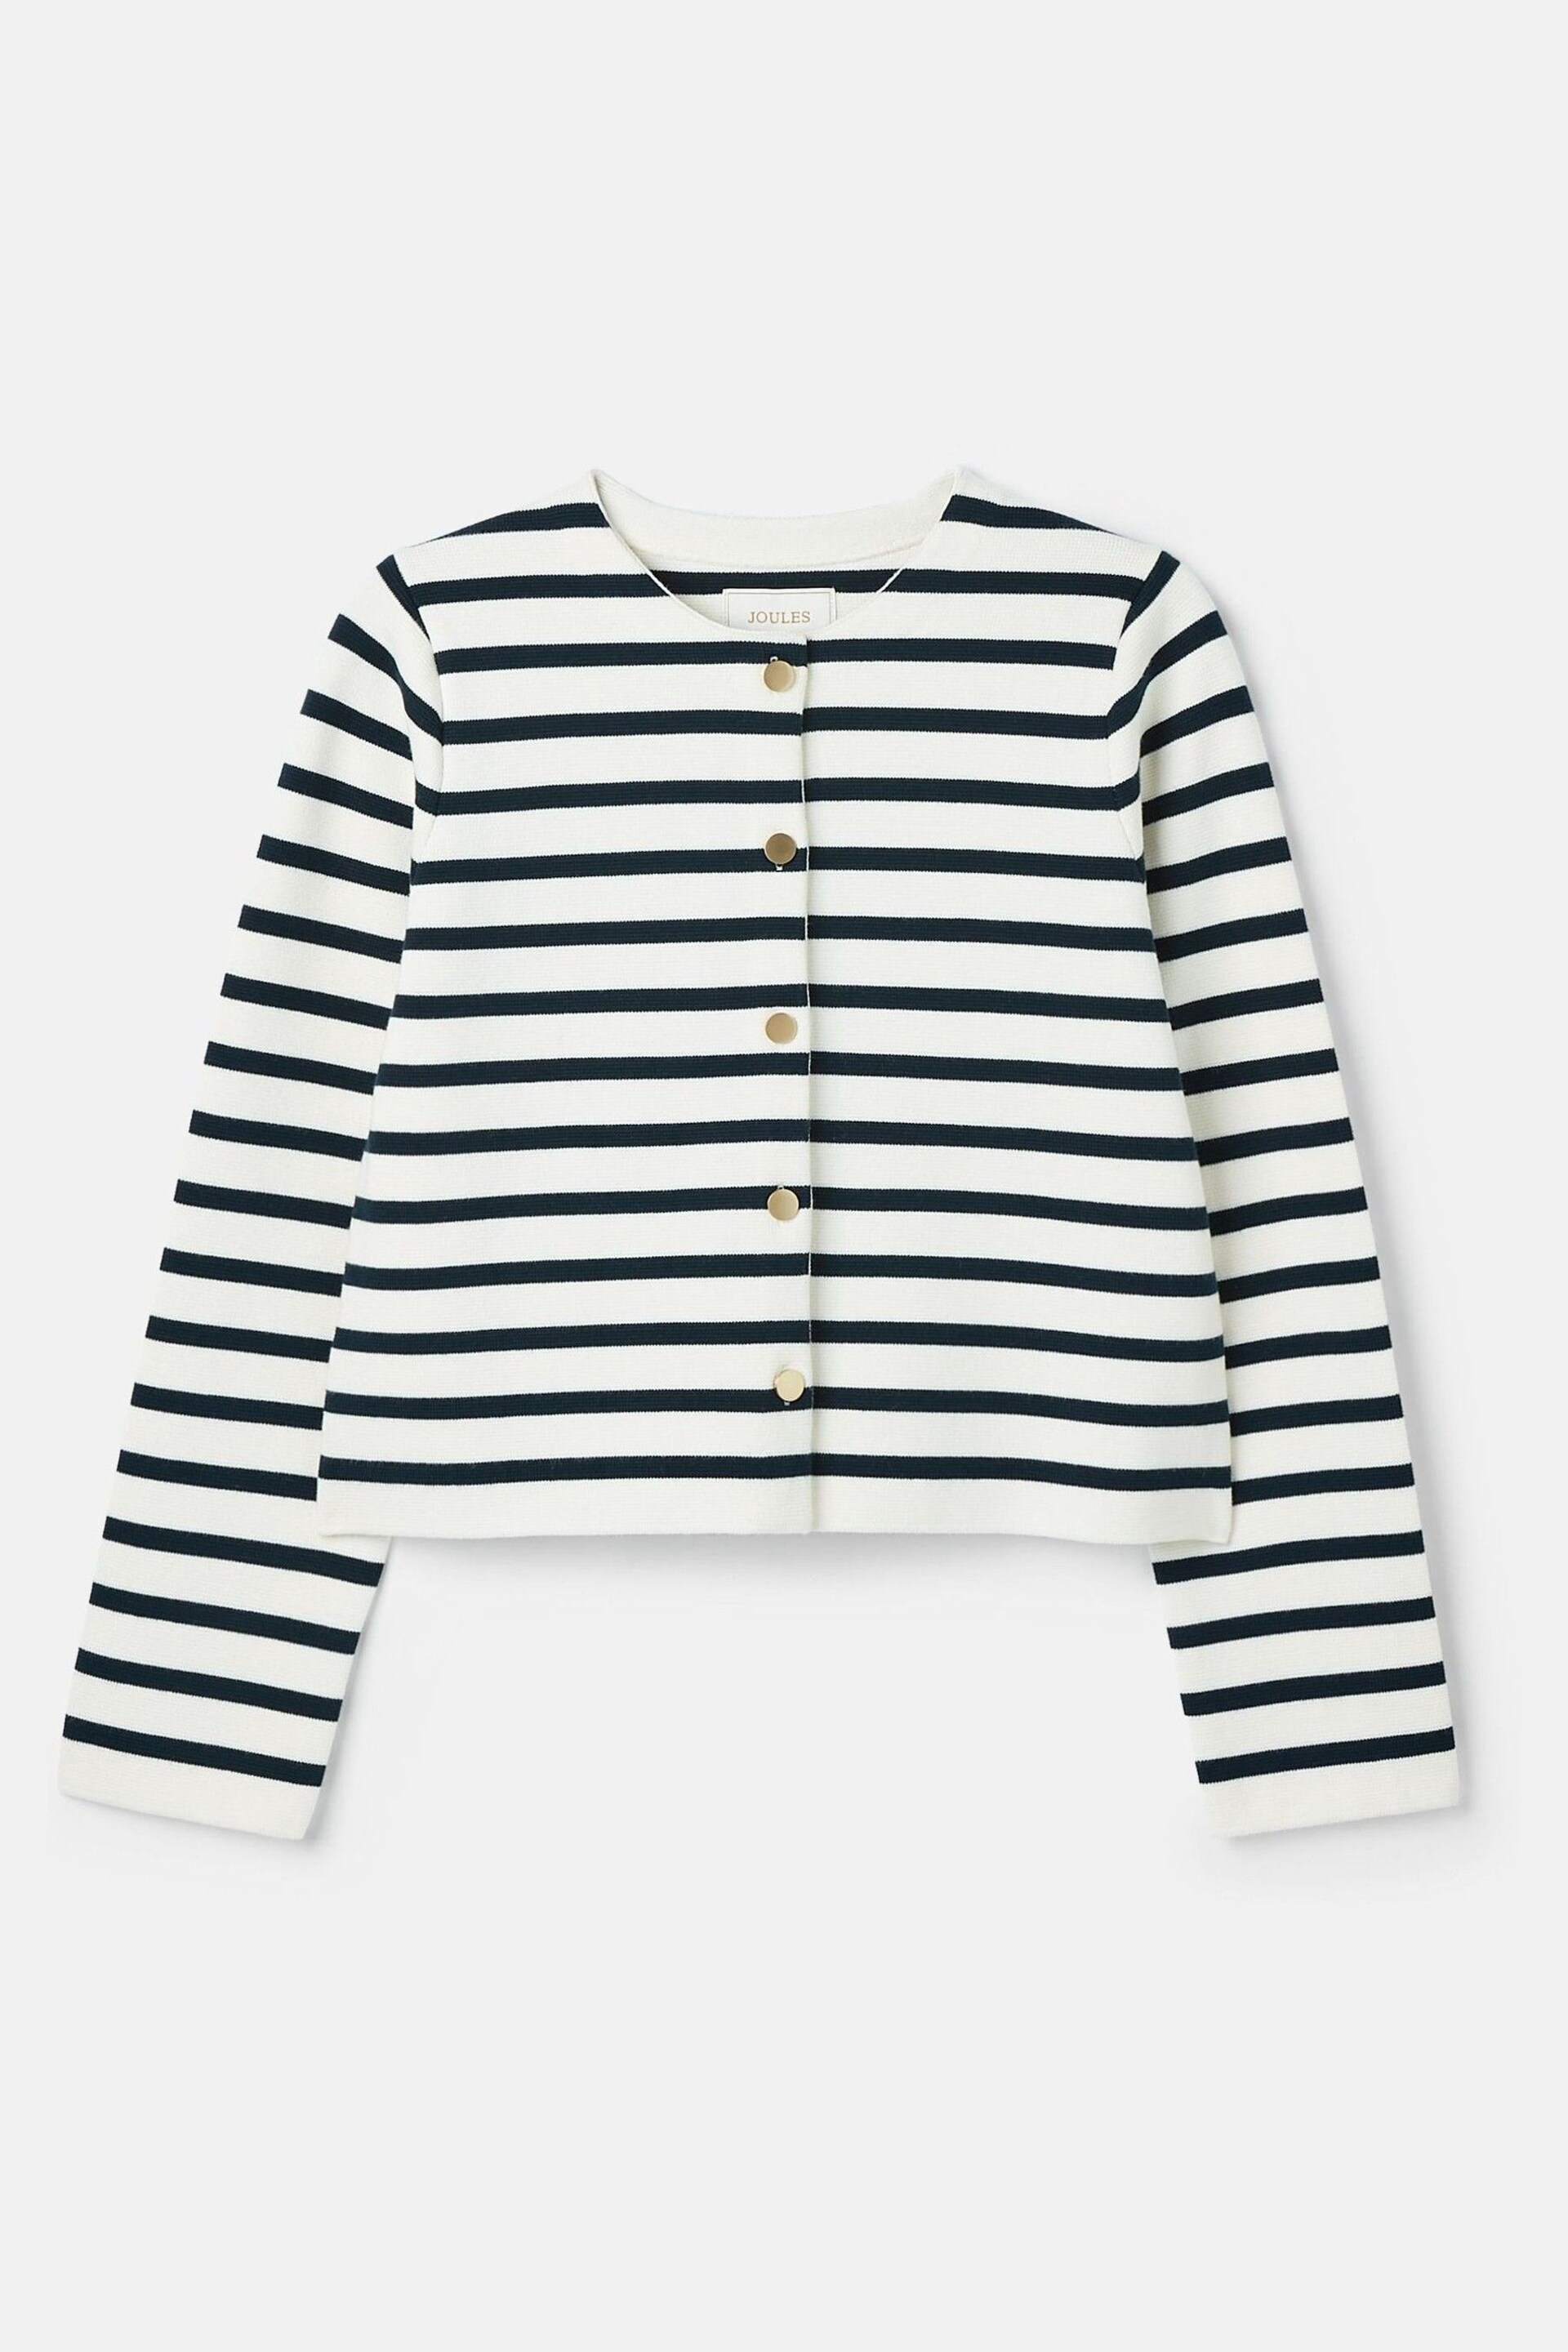 Joules Constance Cream & Navy Striped Cotton Cardigan - Image 10 of 10